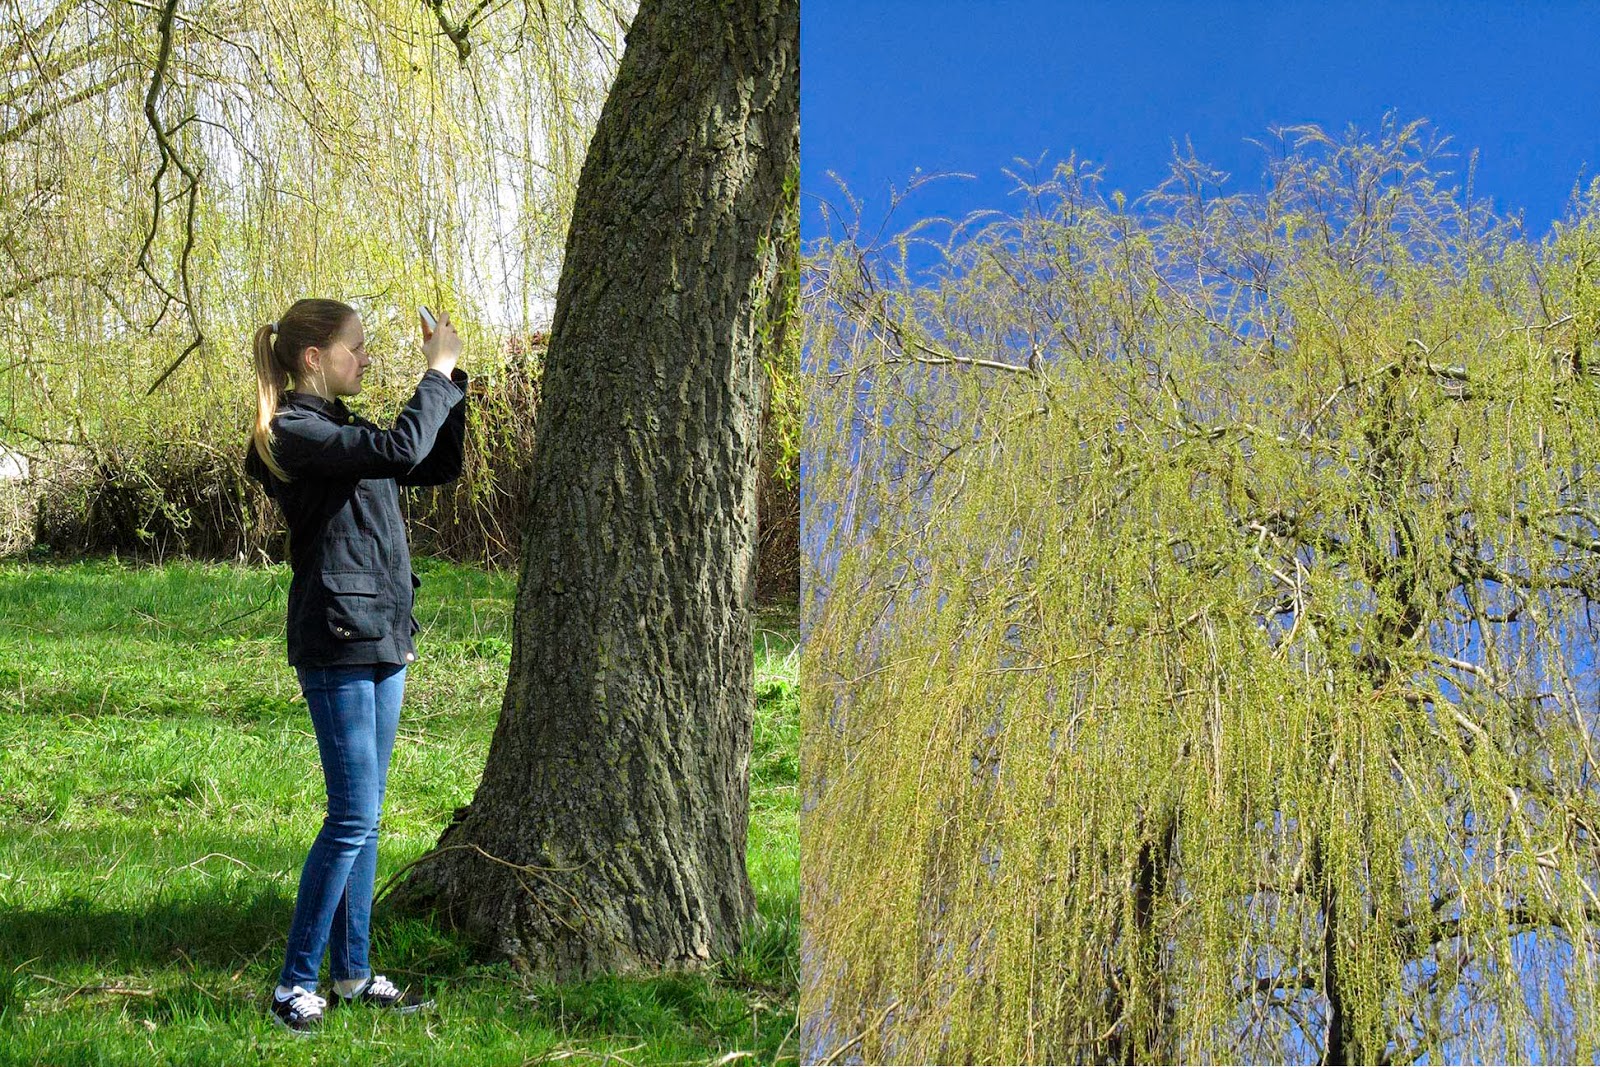 my niece Emily taking picture of this yellow tree